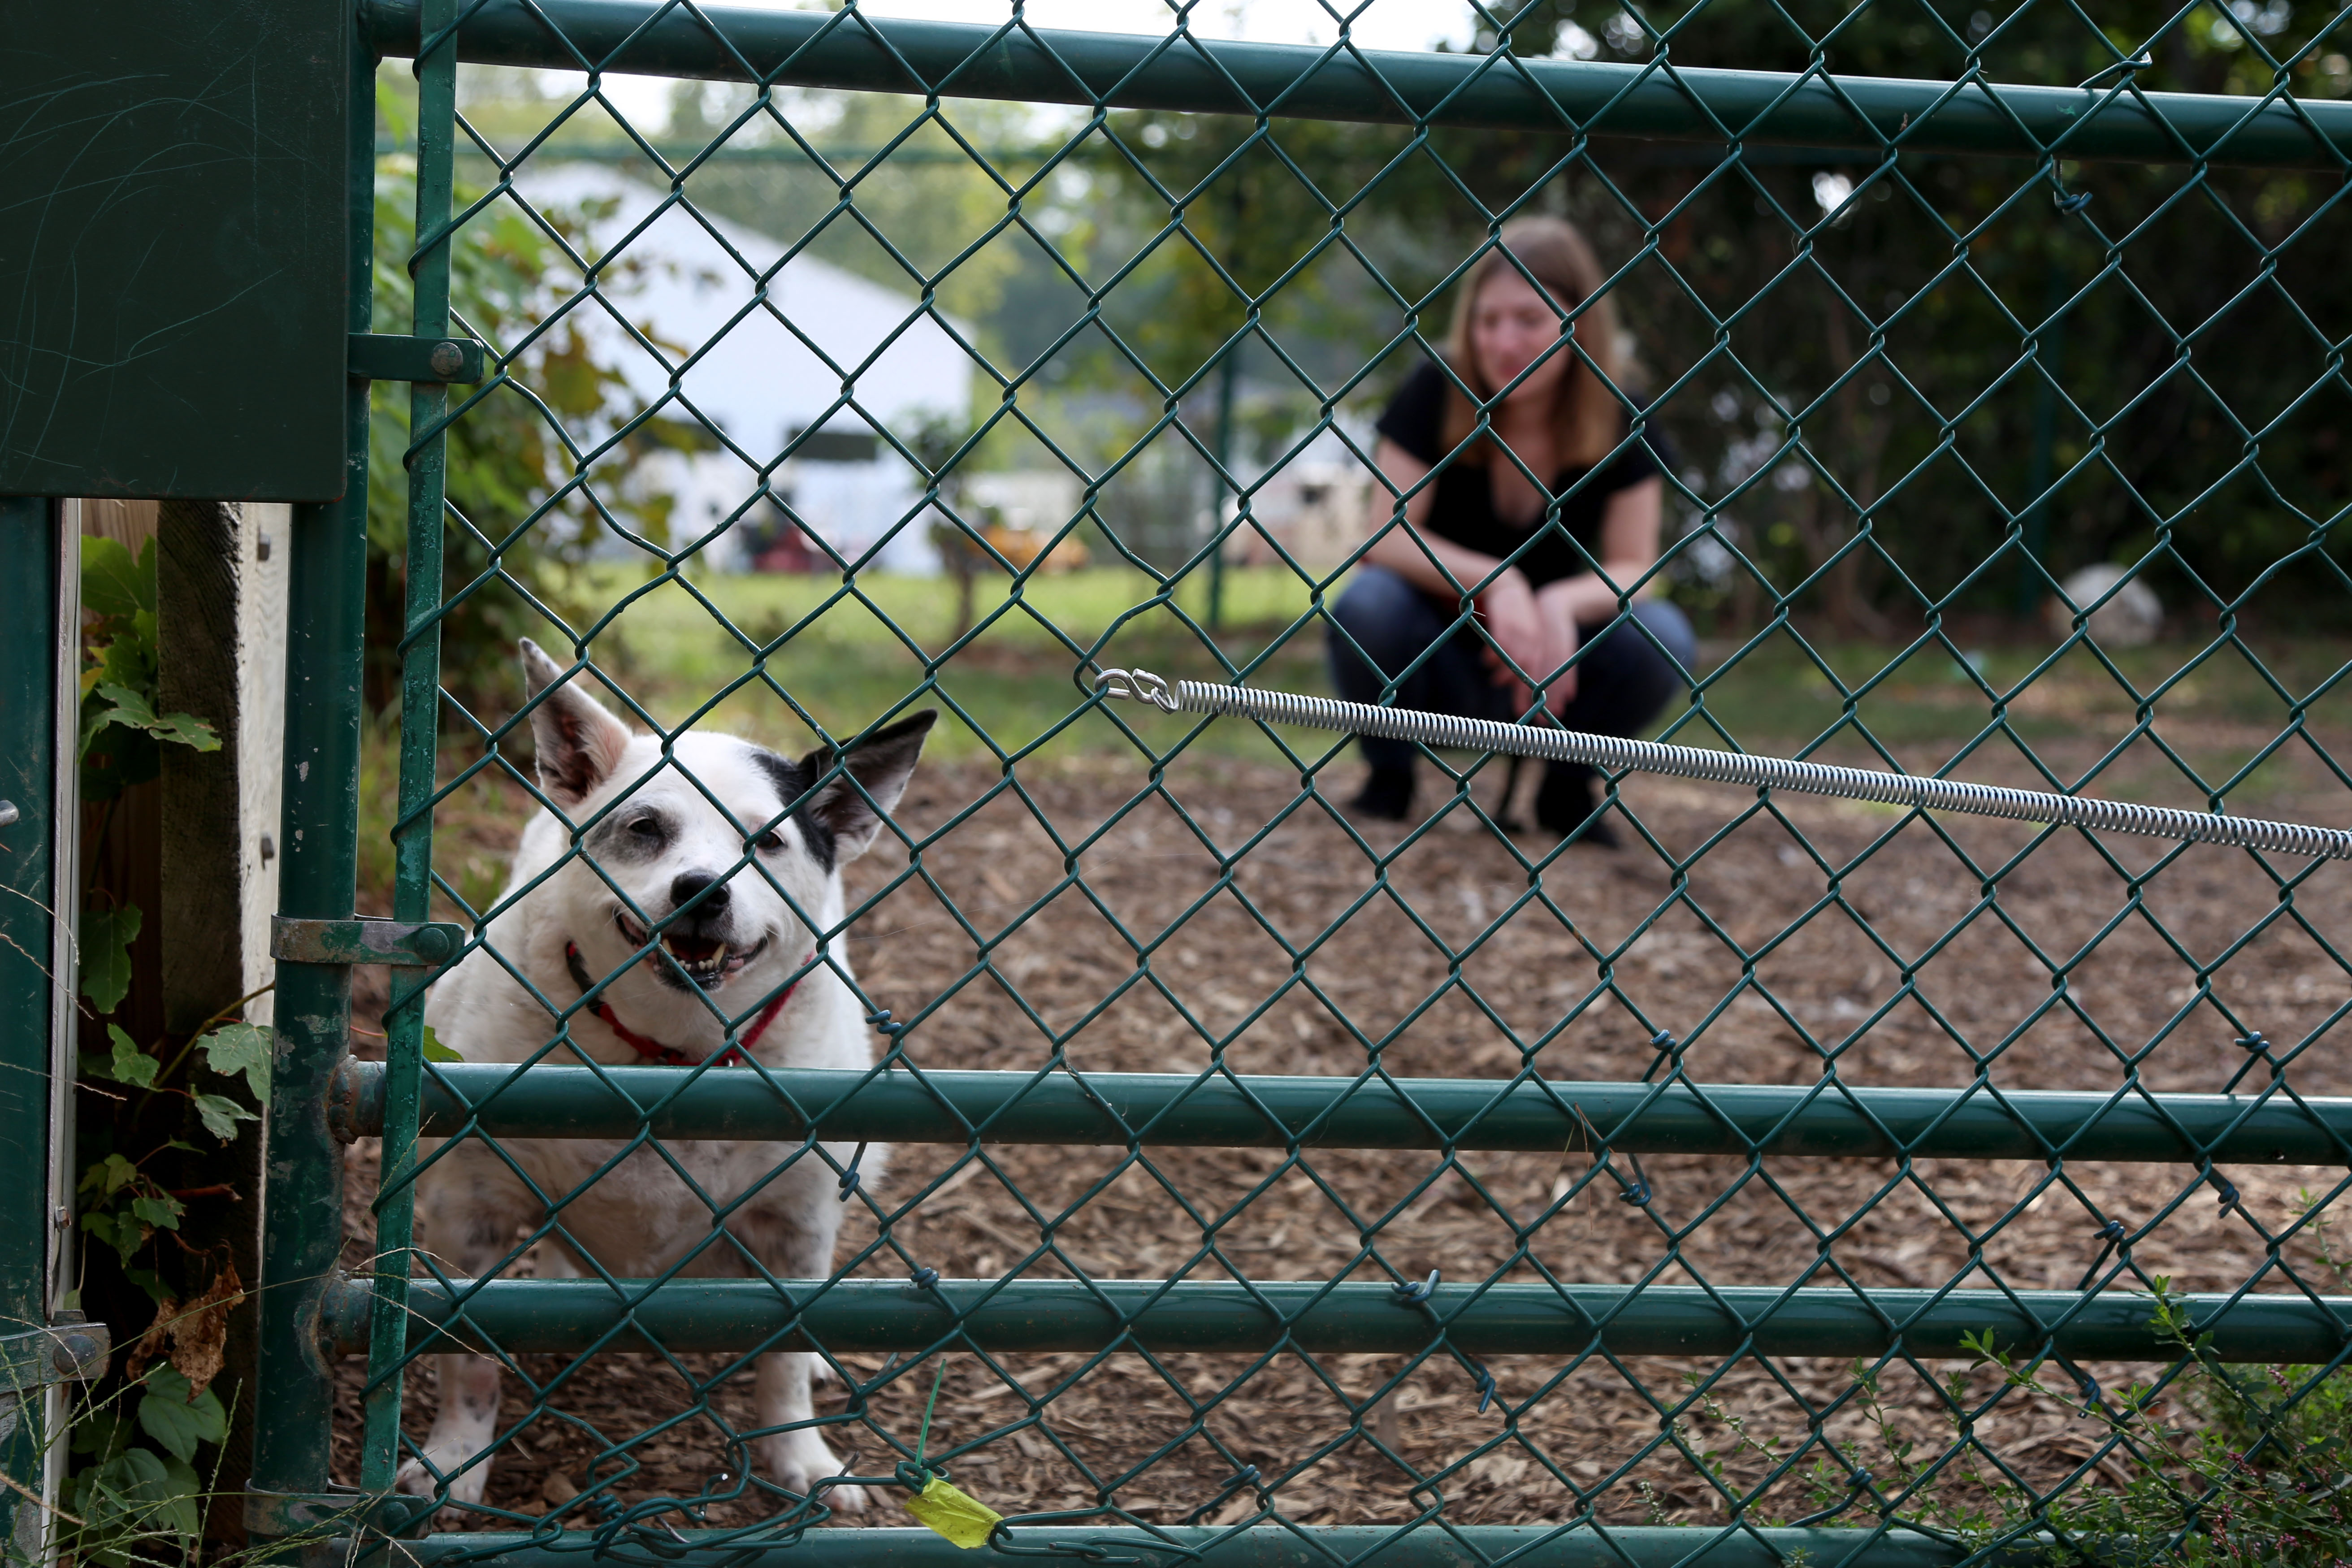 A small white and black dog stands behind a fence, looking at the camera. Sam is shown, out of focus, in the background.